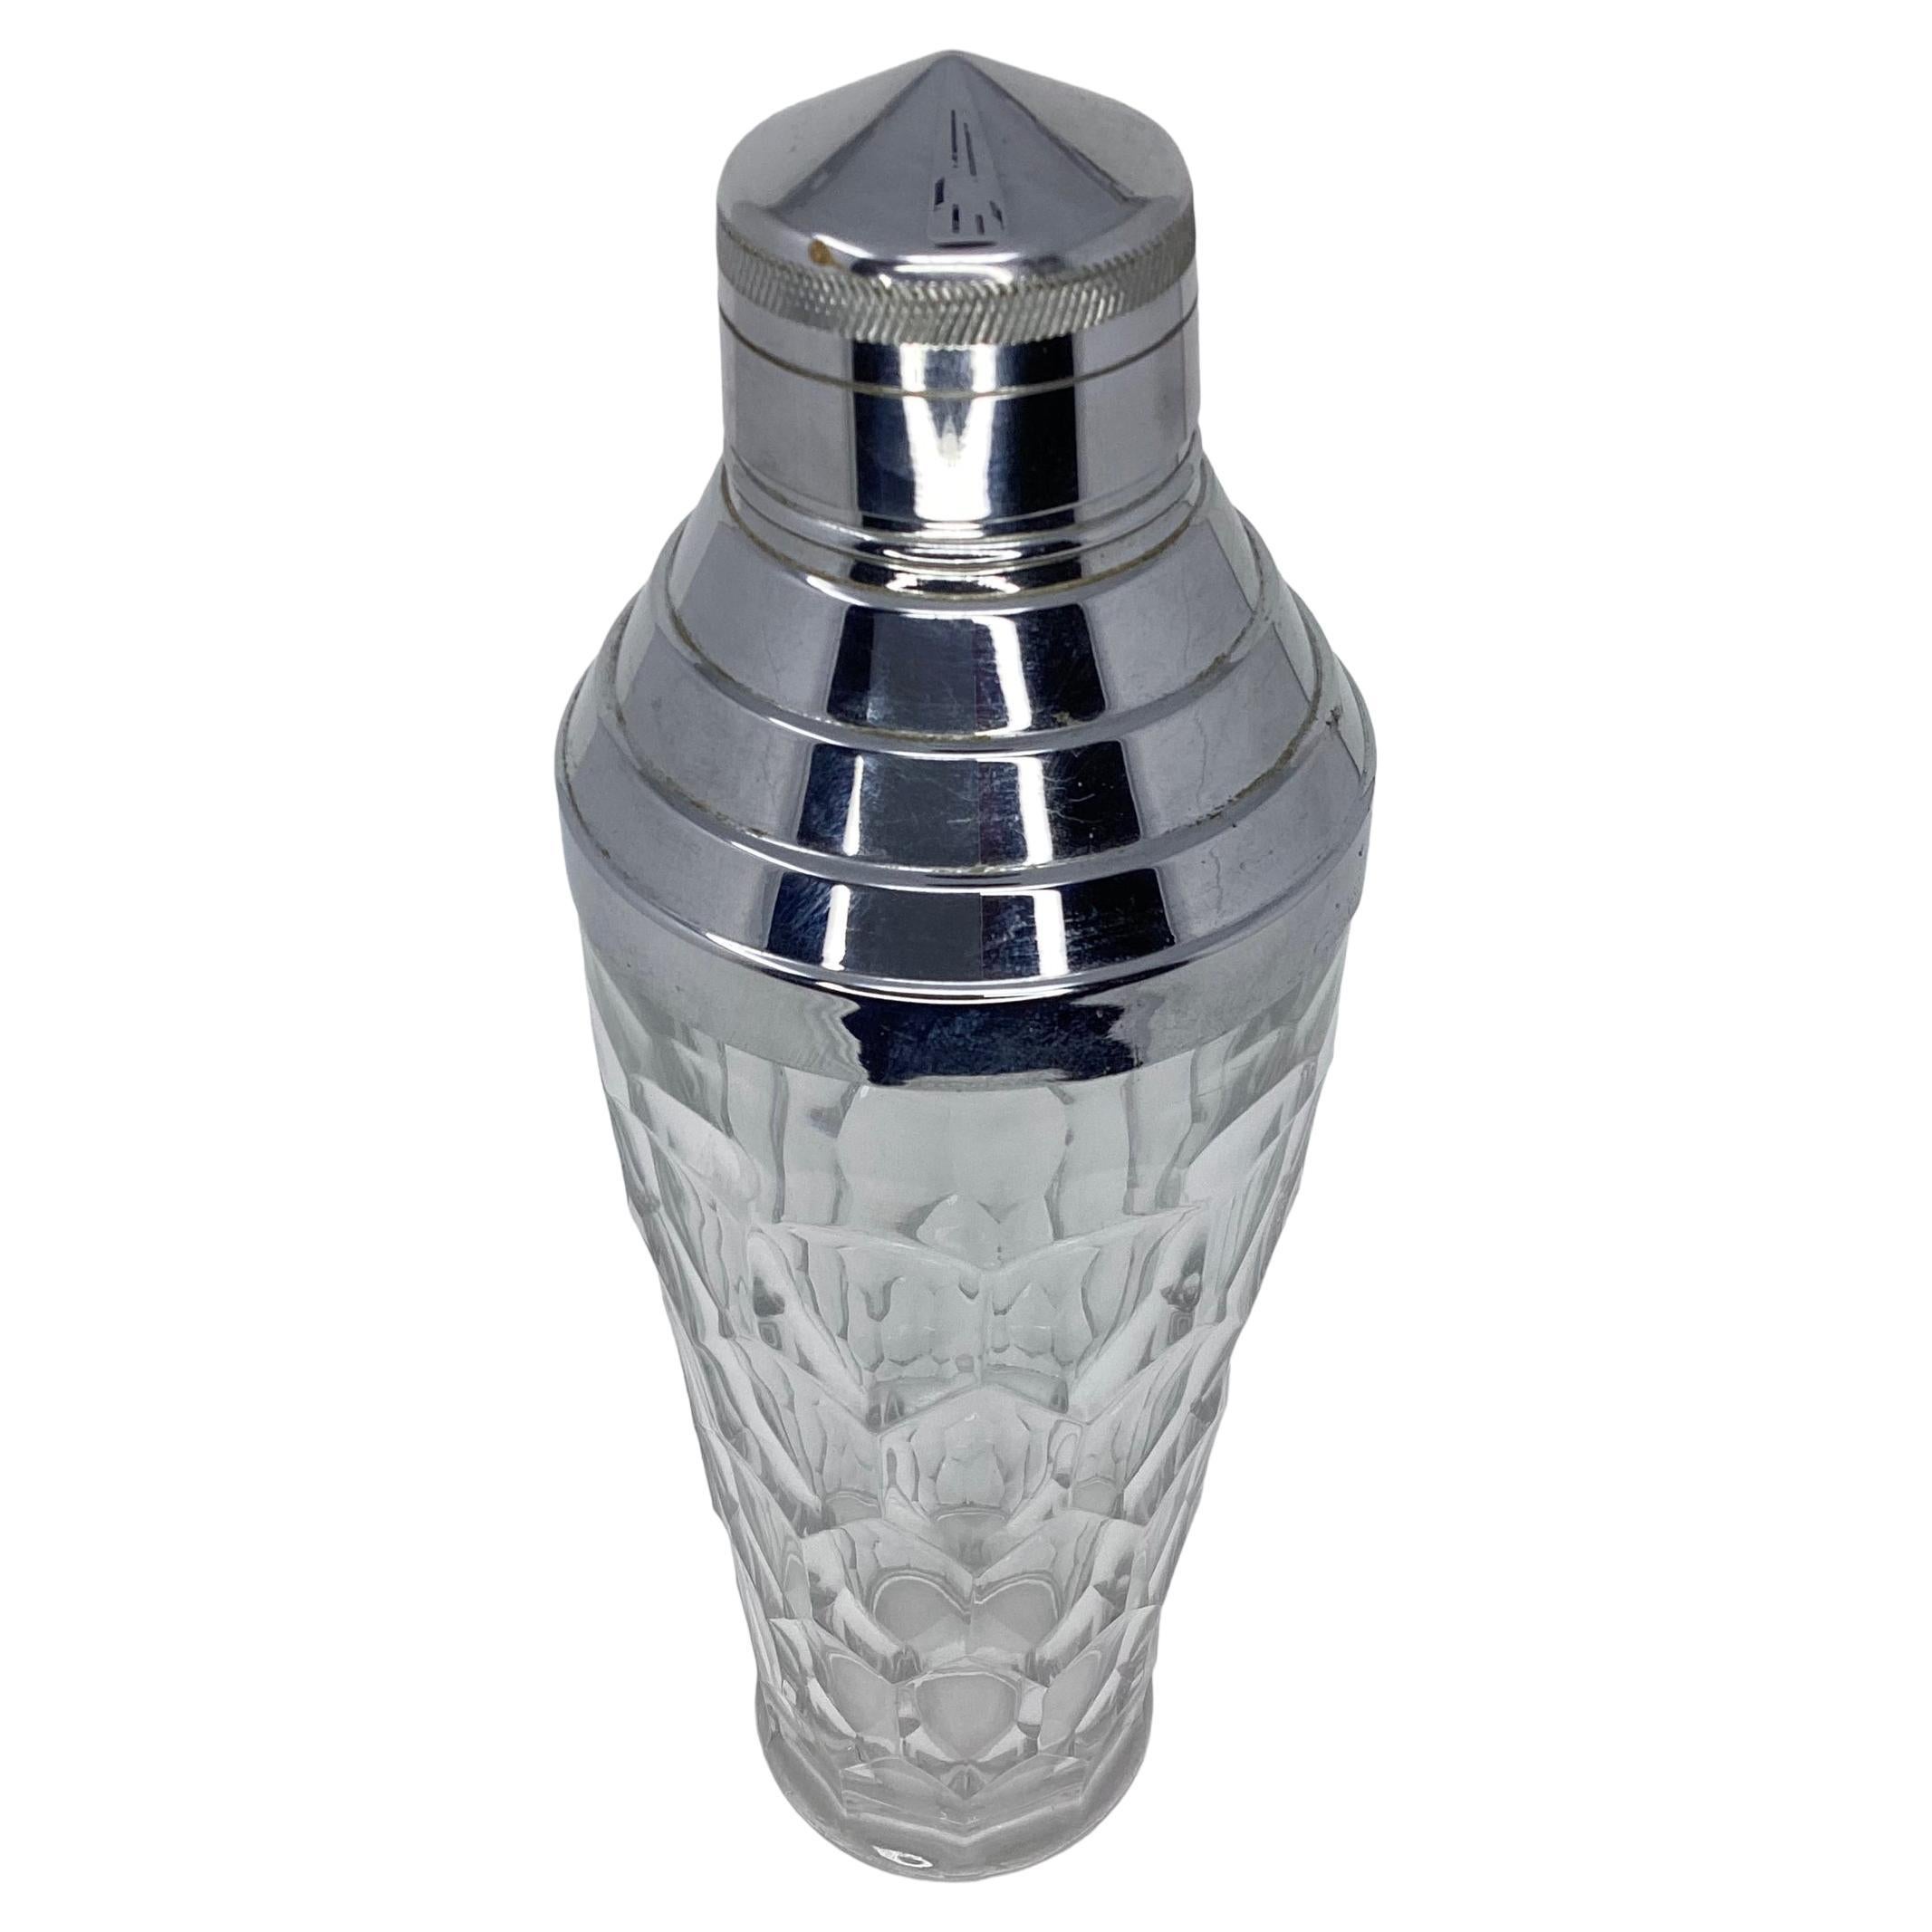 https://a.1stdibscdn.com/art-deco-molded-clear-glass-cocktail-shaker-with-diamond-pattern-for-sale/f_73712/f_358222521692805586080/f_35822252_1692805586753_bg_processed.jpg